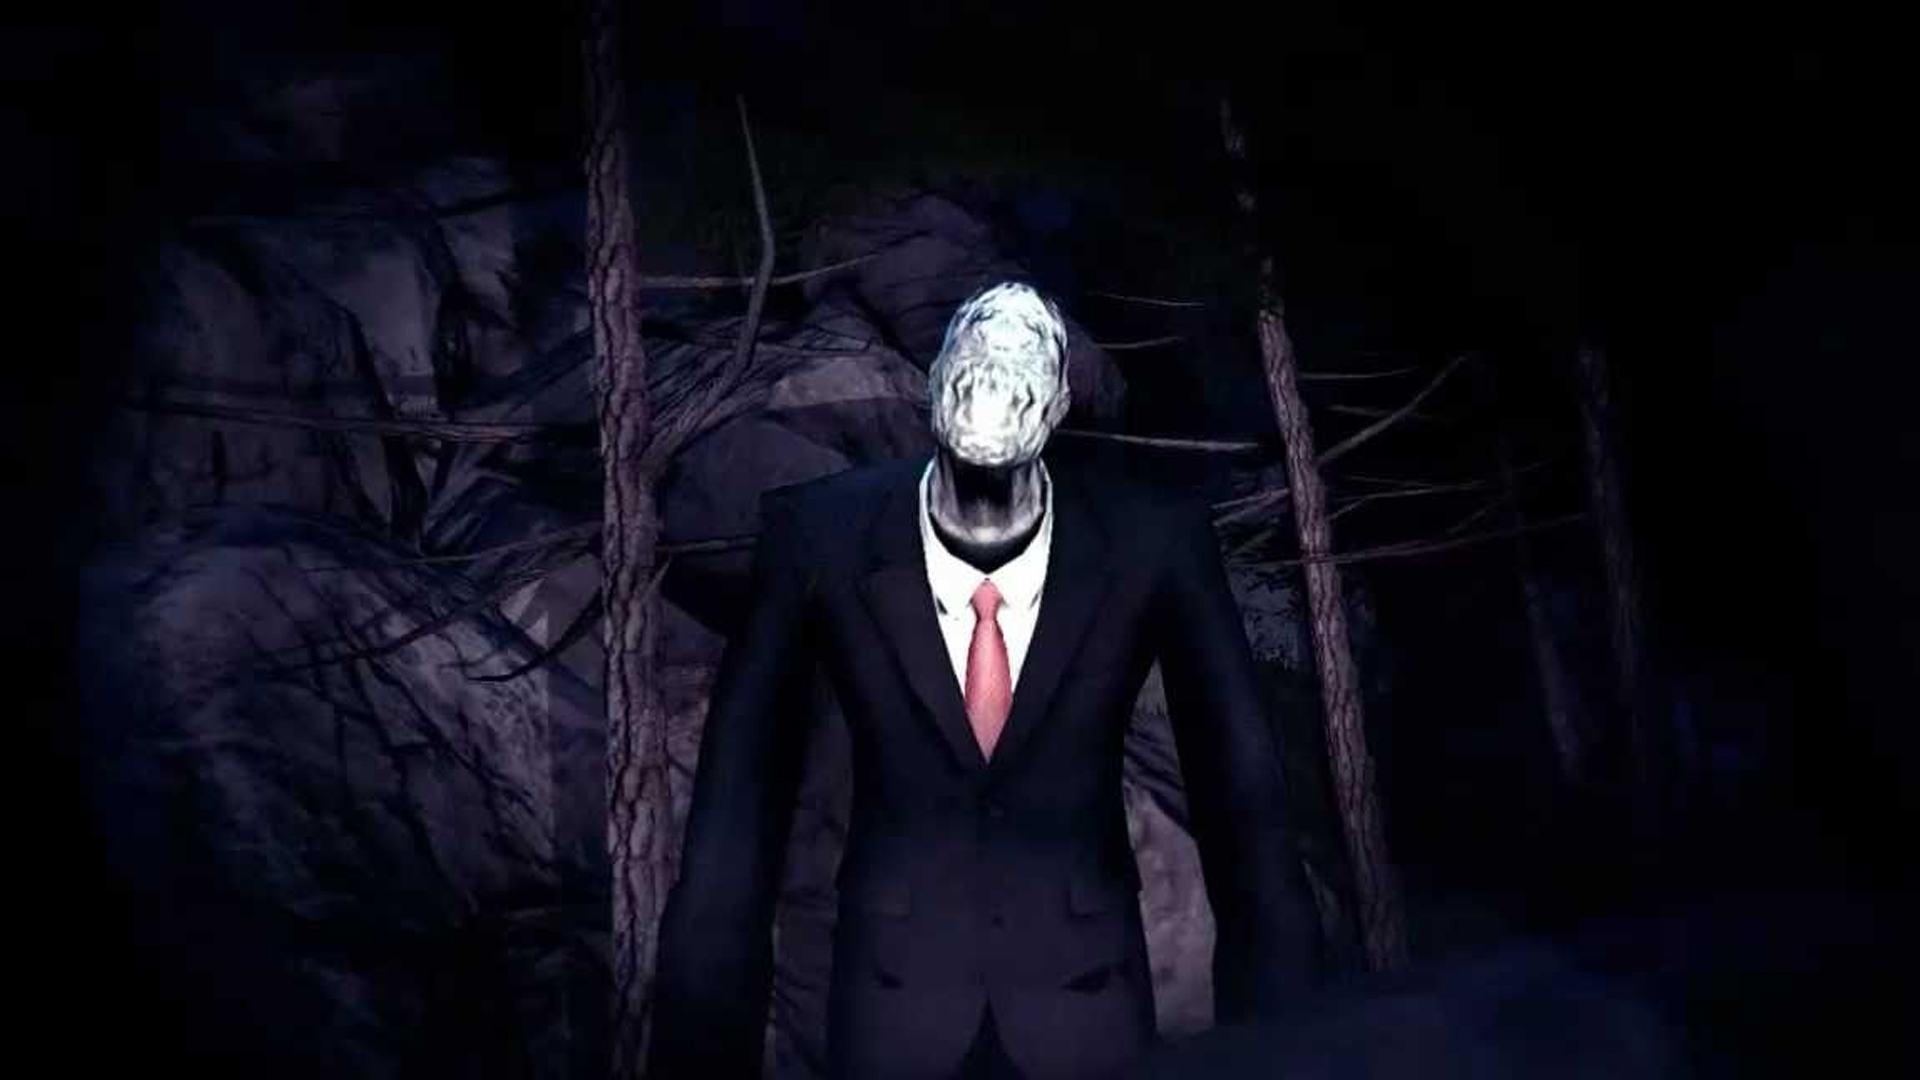 Artistry in Games slenderman_featured Urban Legends in Games: A Creepy Crash Course Features  urban legends mythology horror  